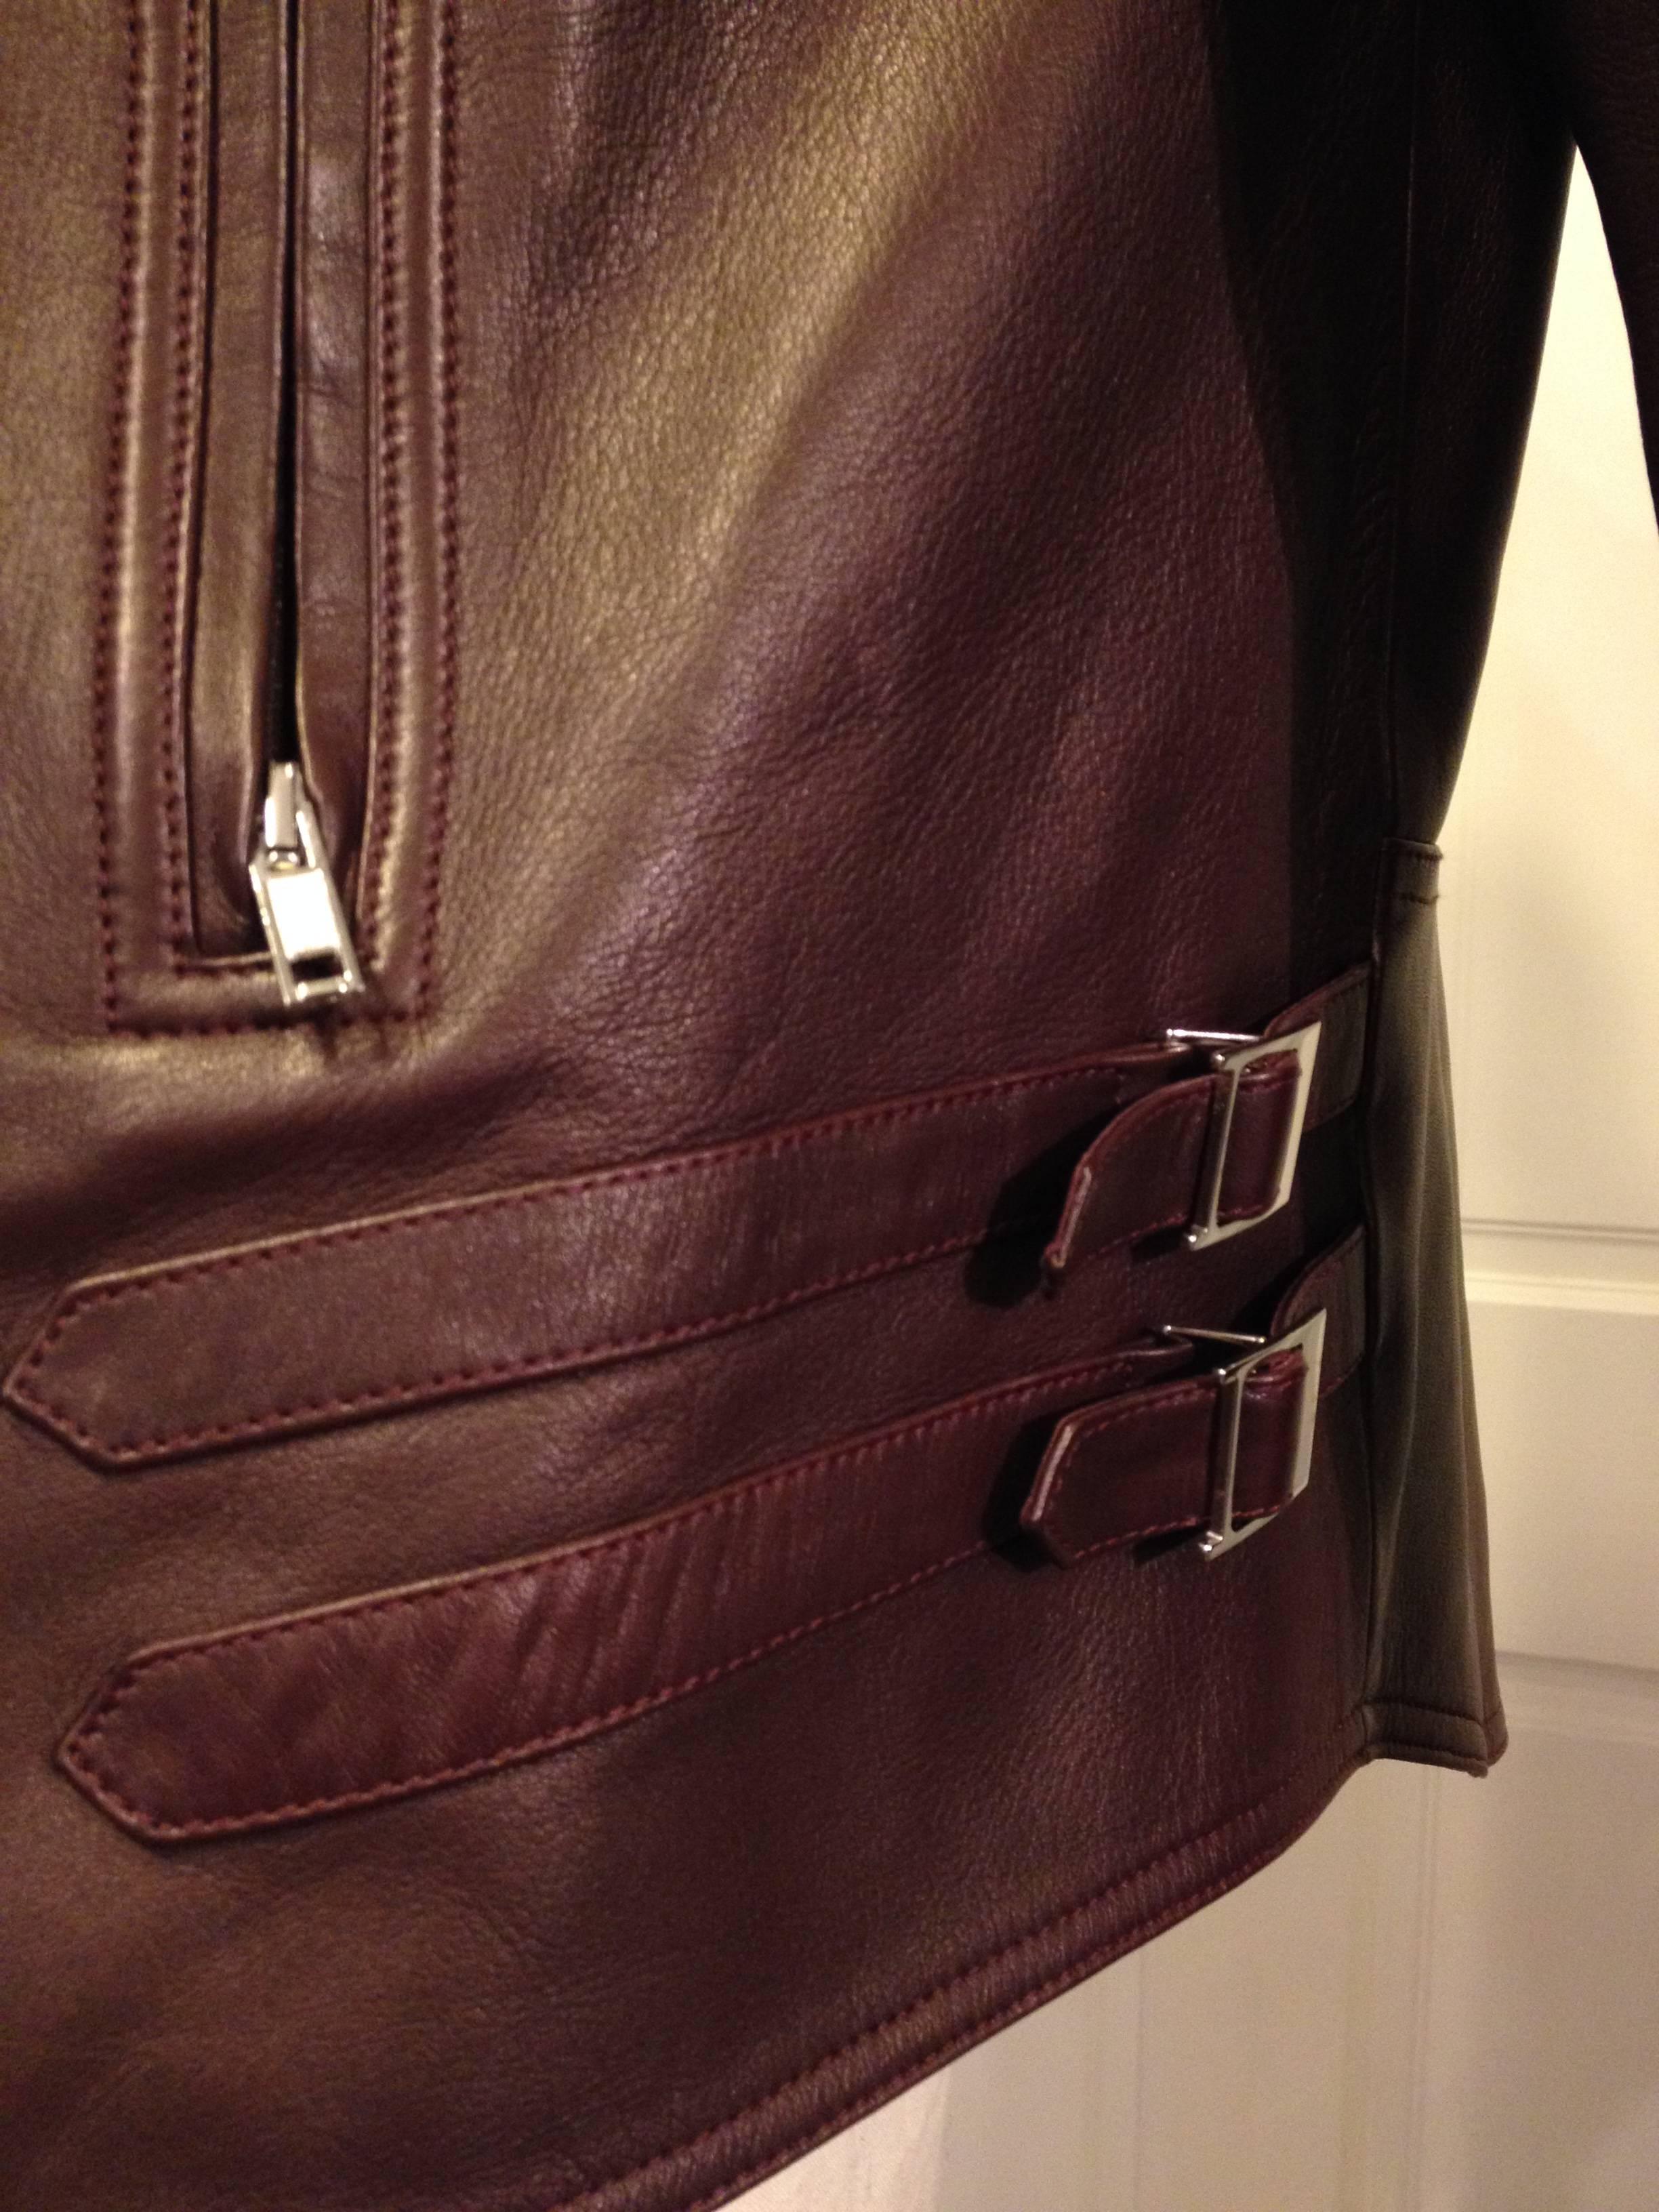 Givenchy Burgundy Ribbed Leather Motorcycle Jacket Size 38 (6) For Sale 3